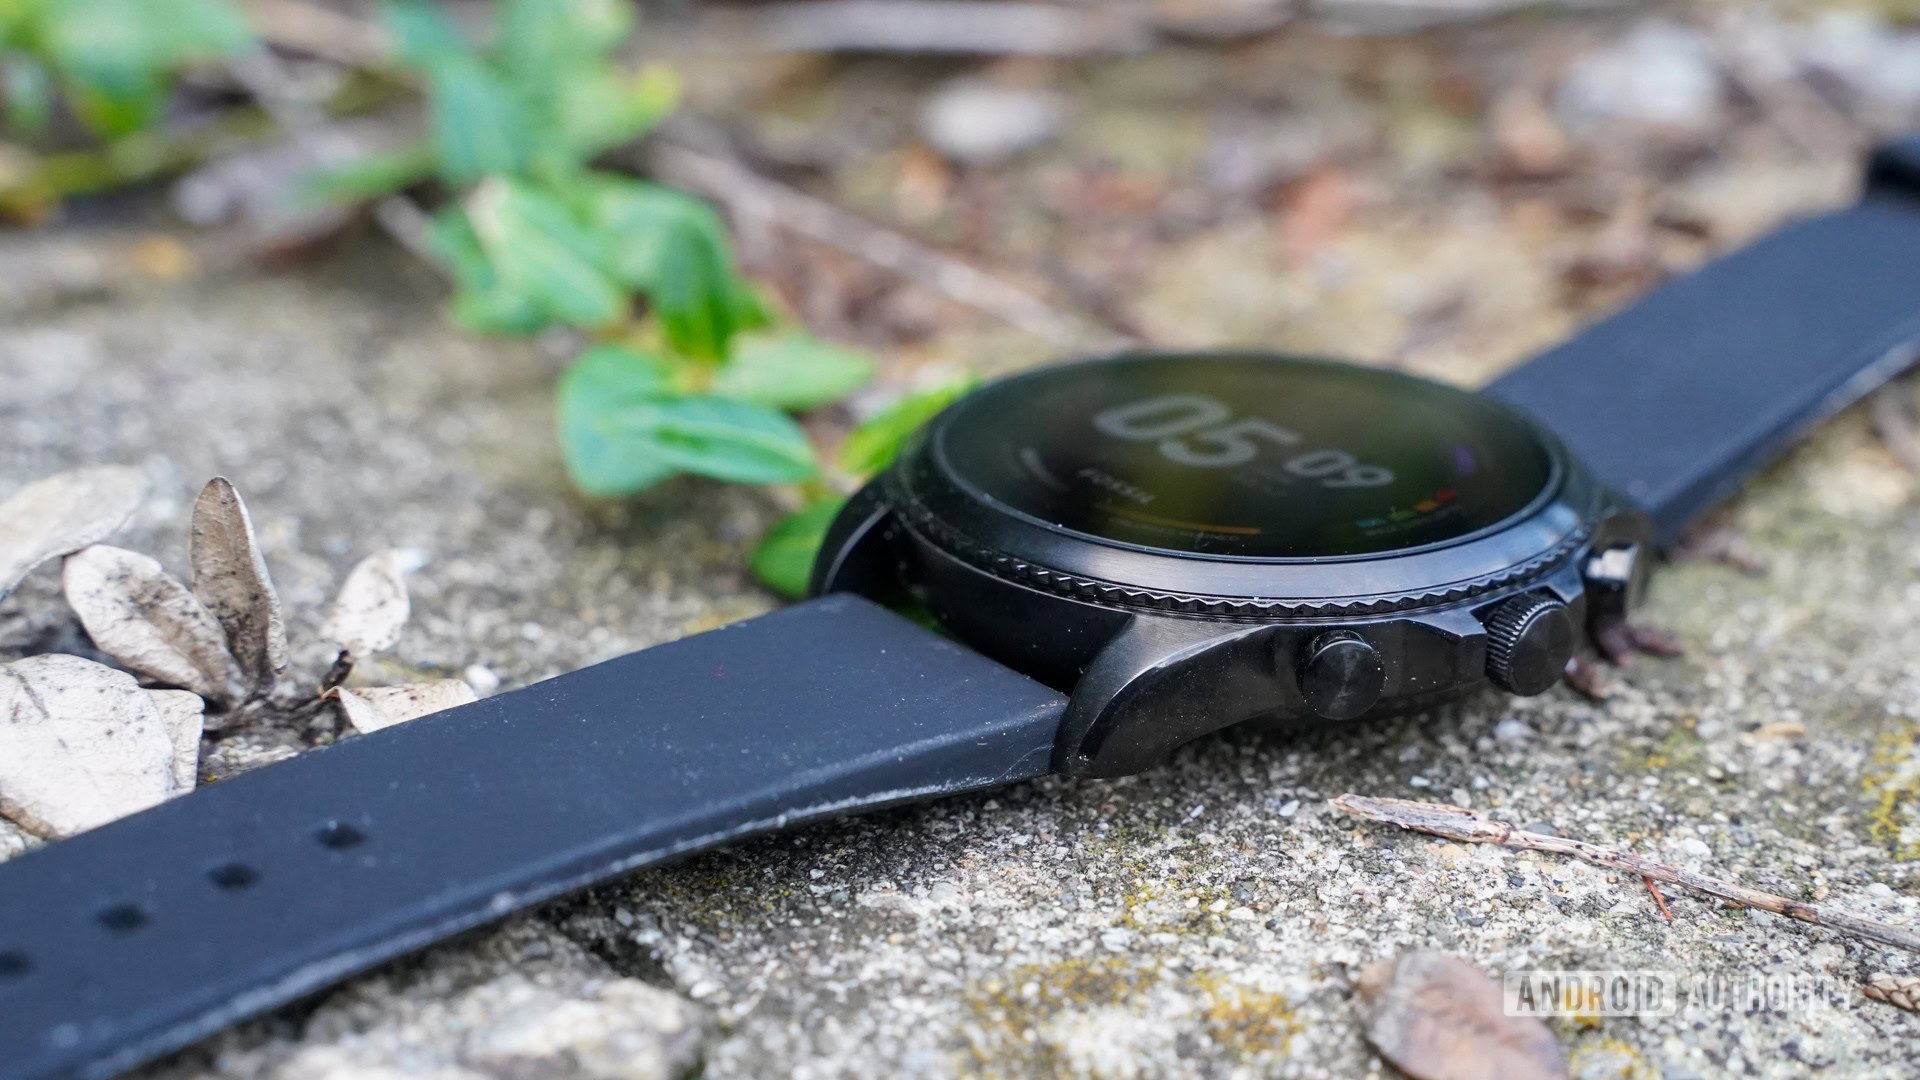 Fossil OS review: finally 3 here 6 Gen is Wear